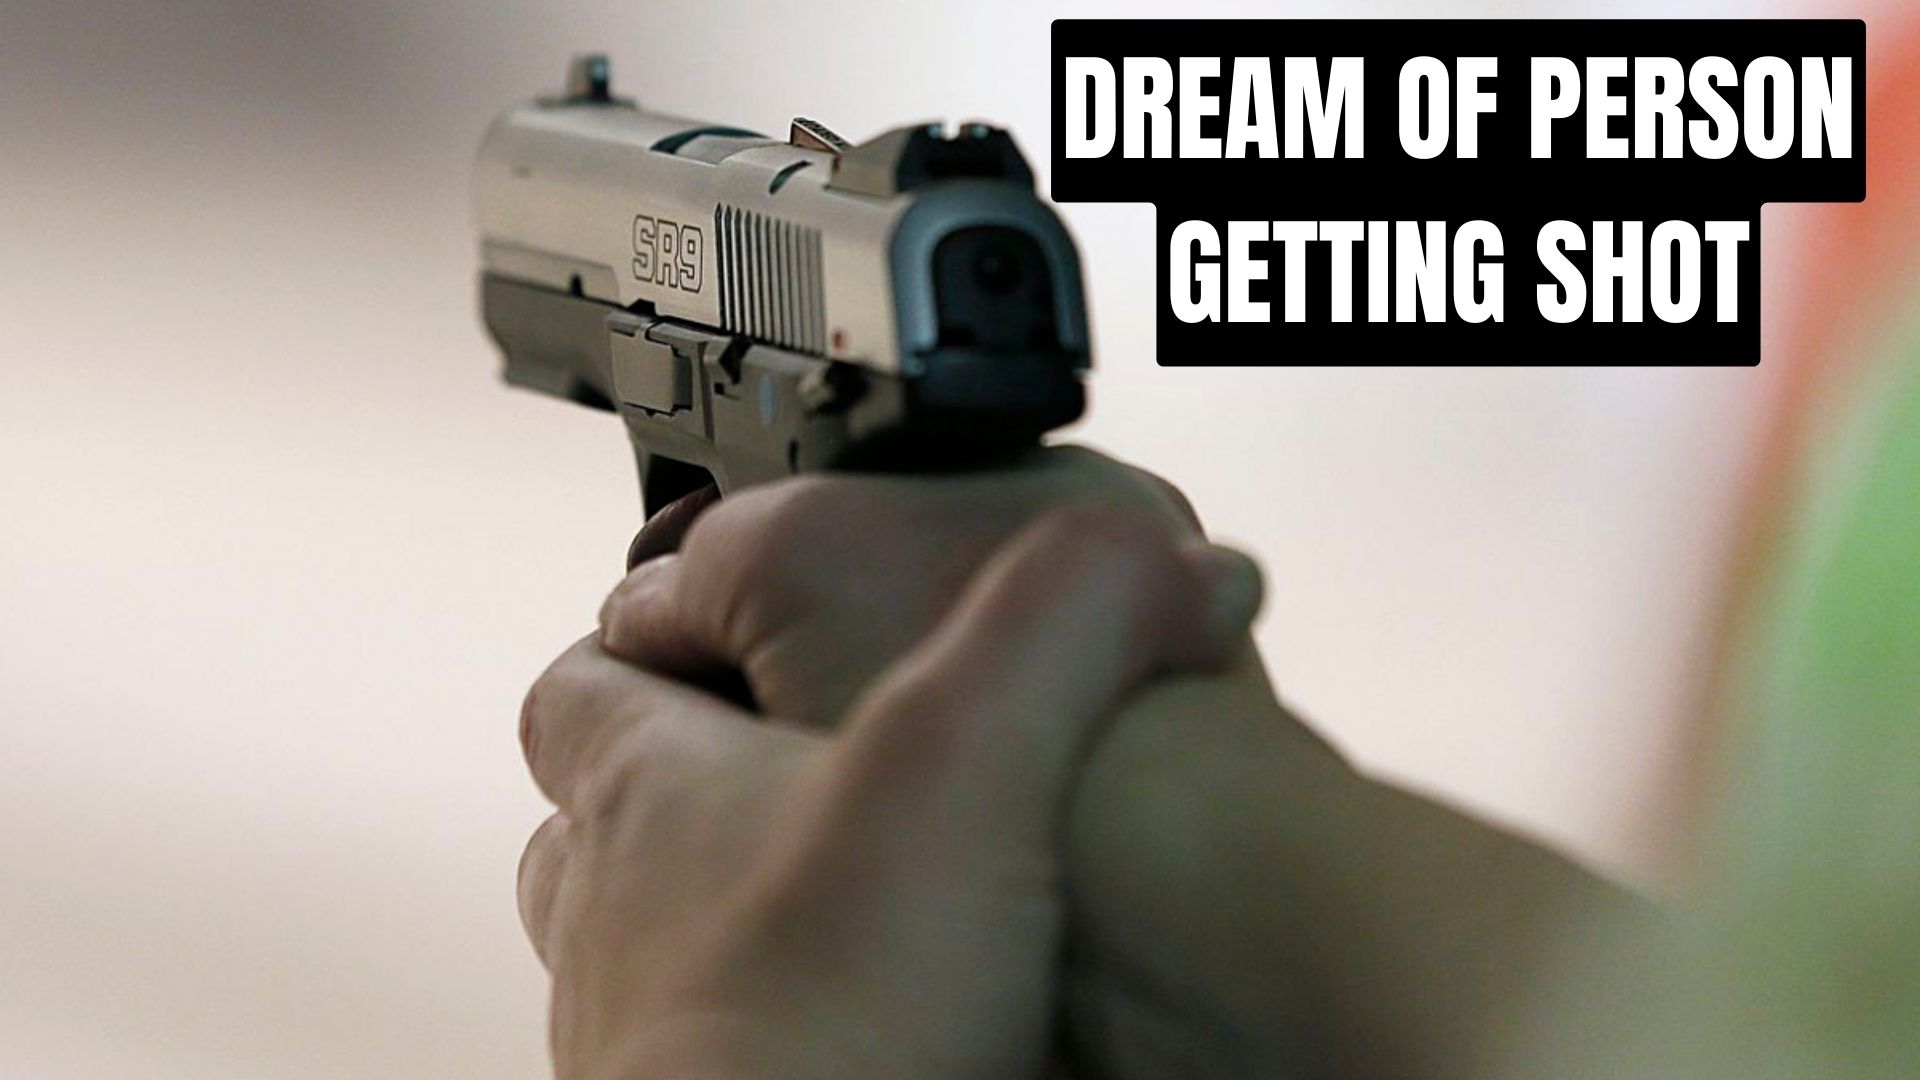 Dream Of Person Getting Shot - Feelings Are A Bit Unclear